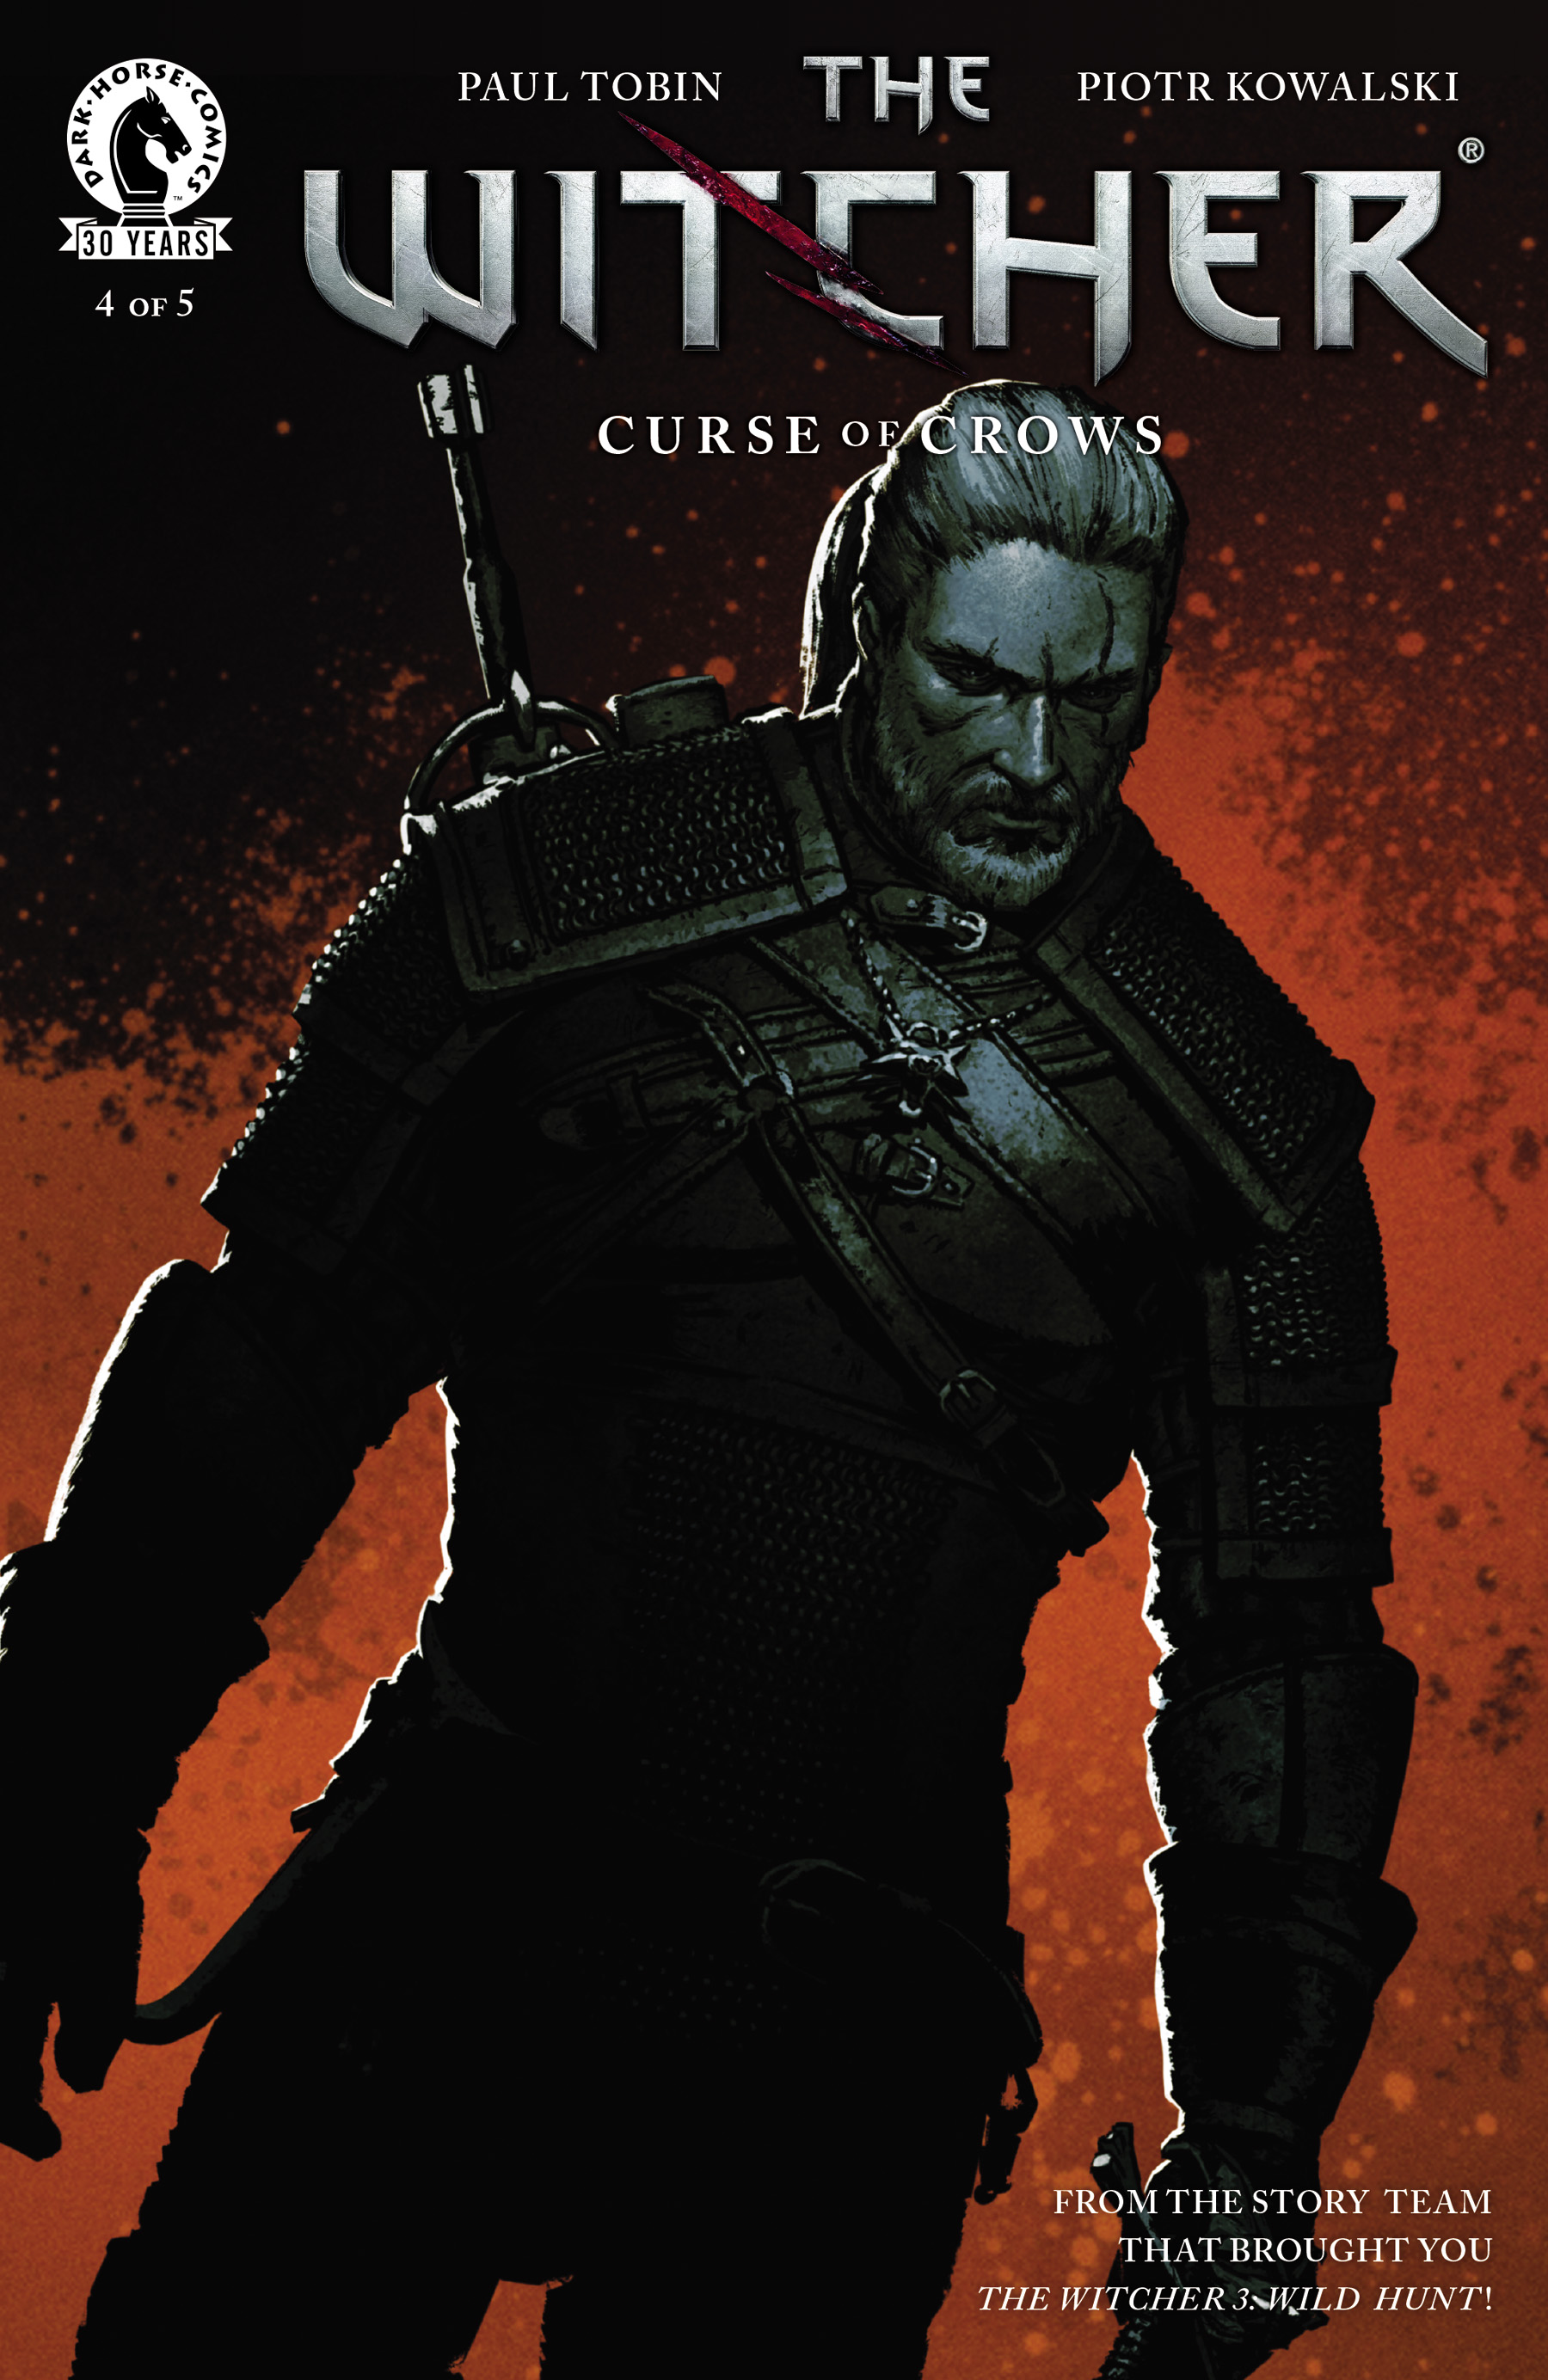 The world of the witcher by Stavious Crowe - Issuu